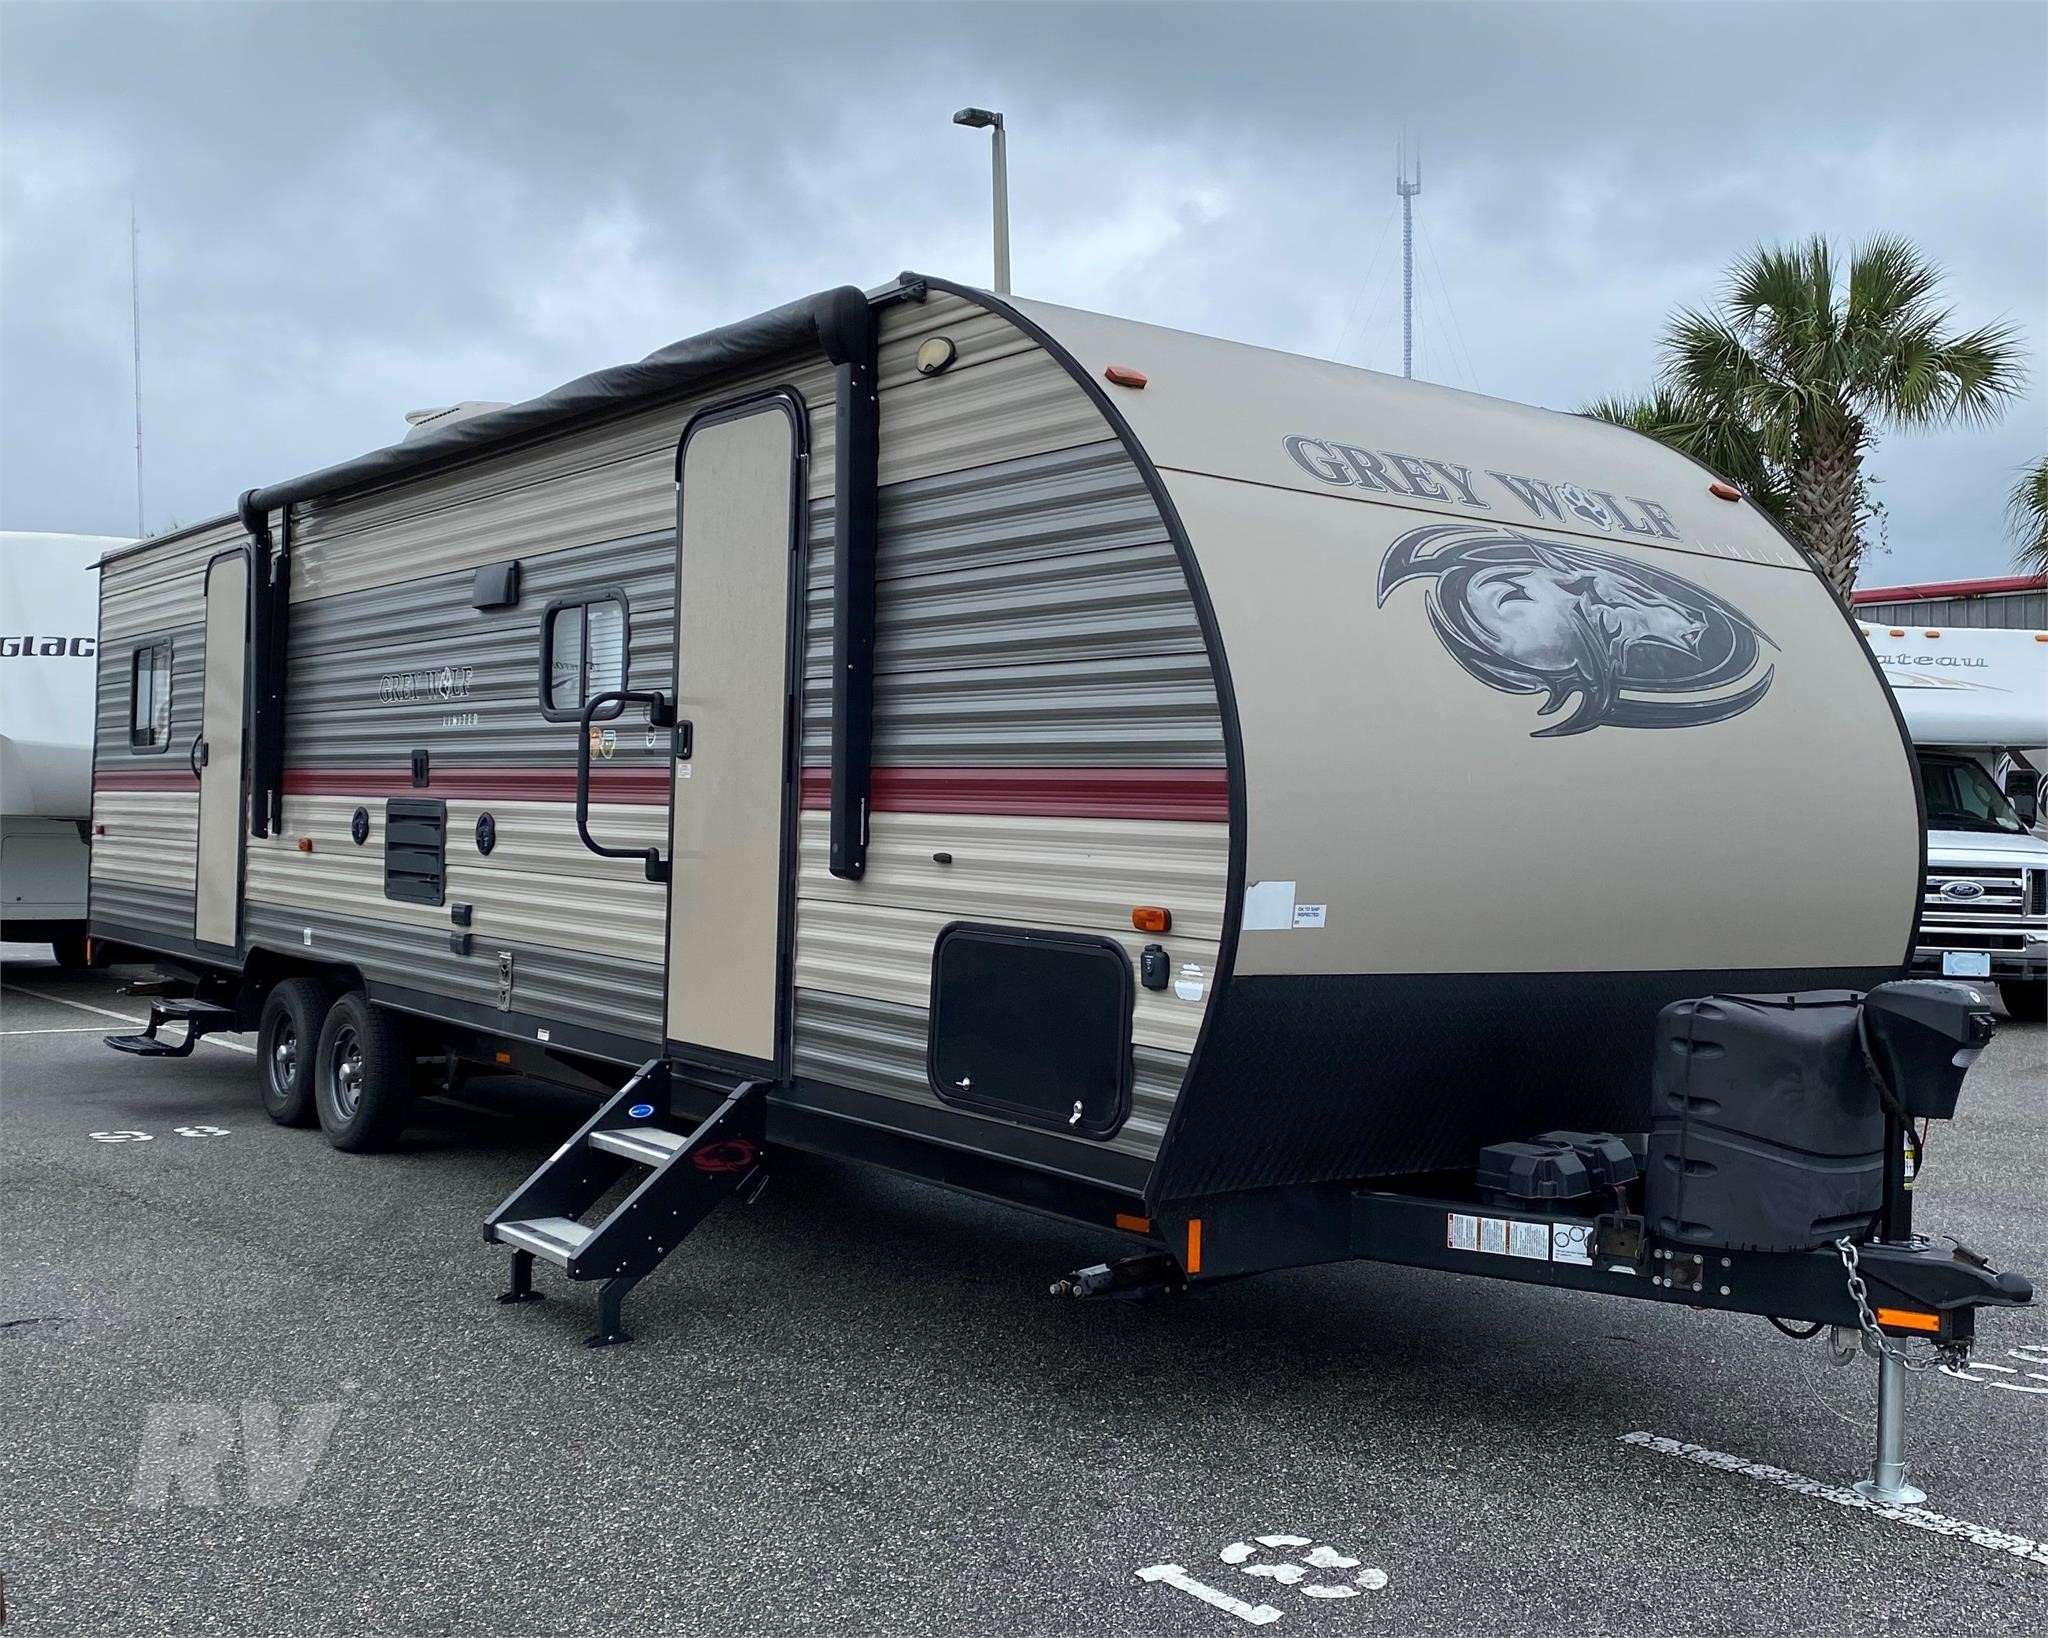 2019 FOREST RIVER CHEROKEE GREY WOLF 27RR For Sale in Jacksonville, Florida | RVUniverse.com 2019 Forest River Cherokee Grey Wolf 27rr